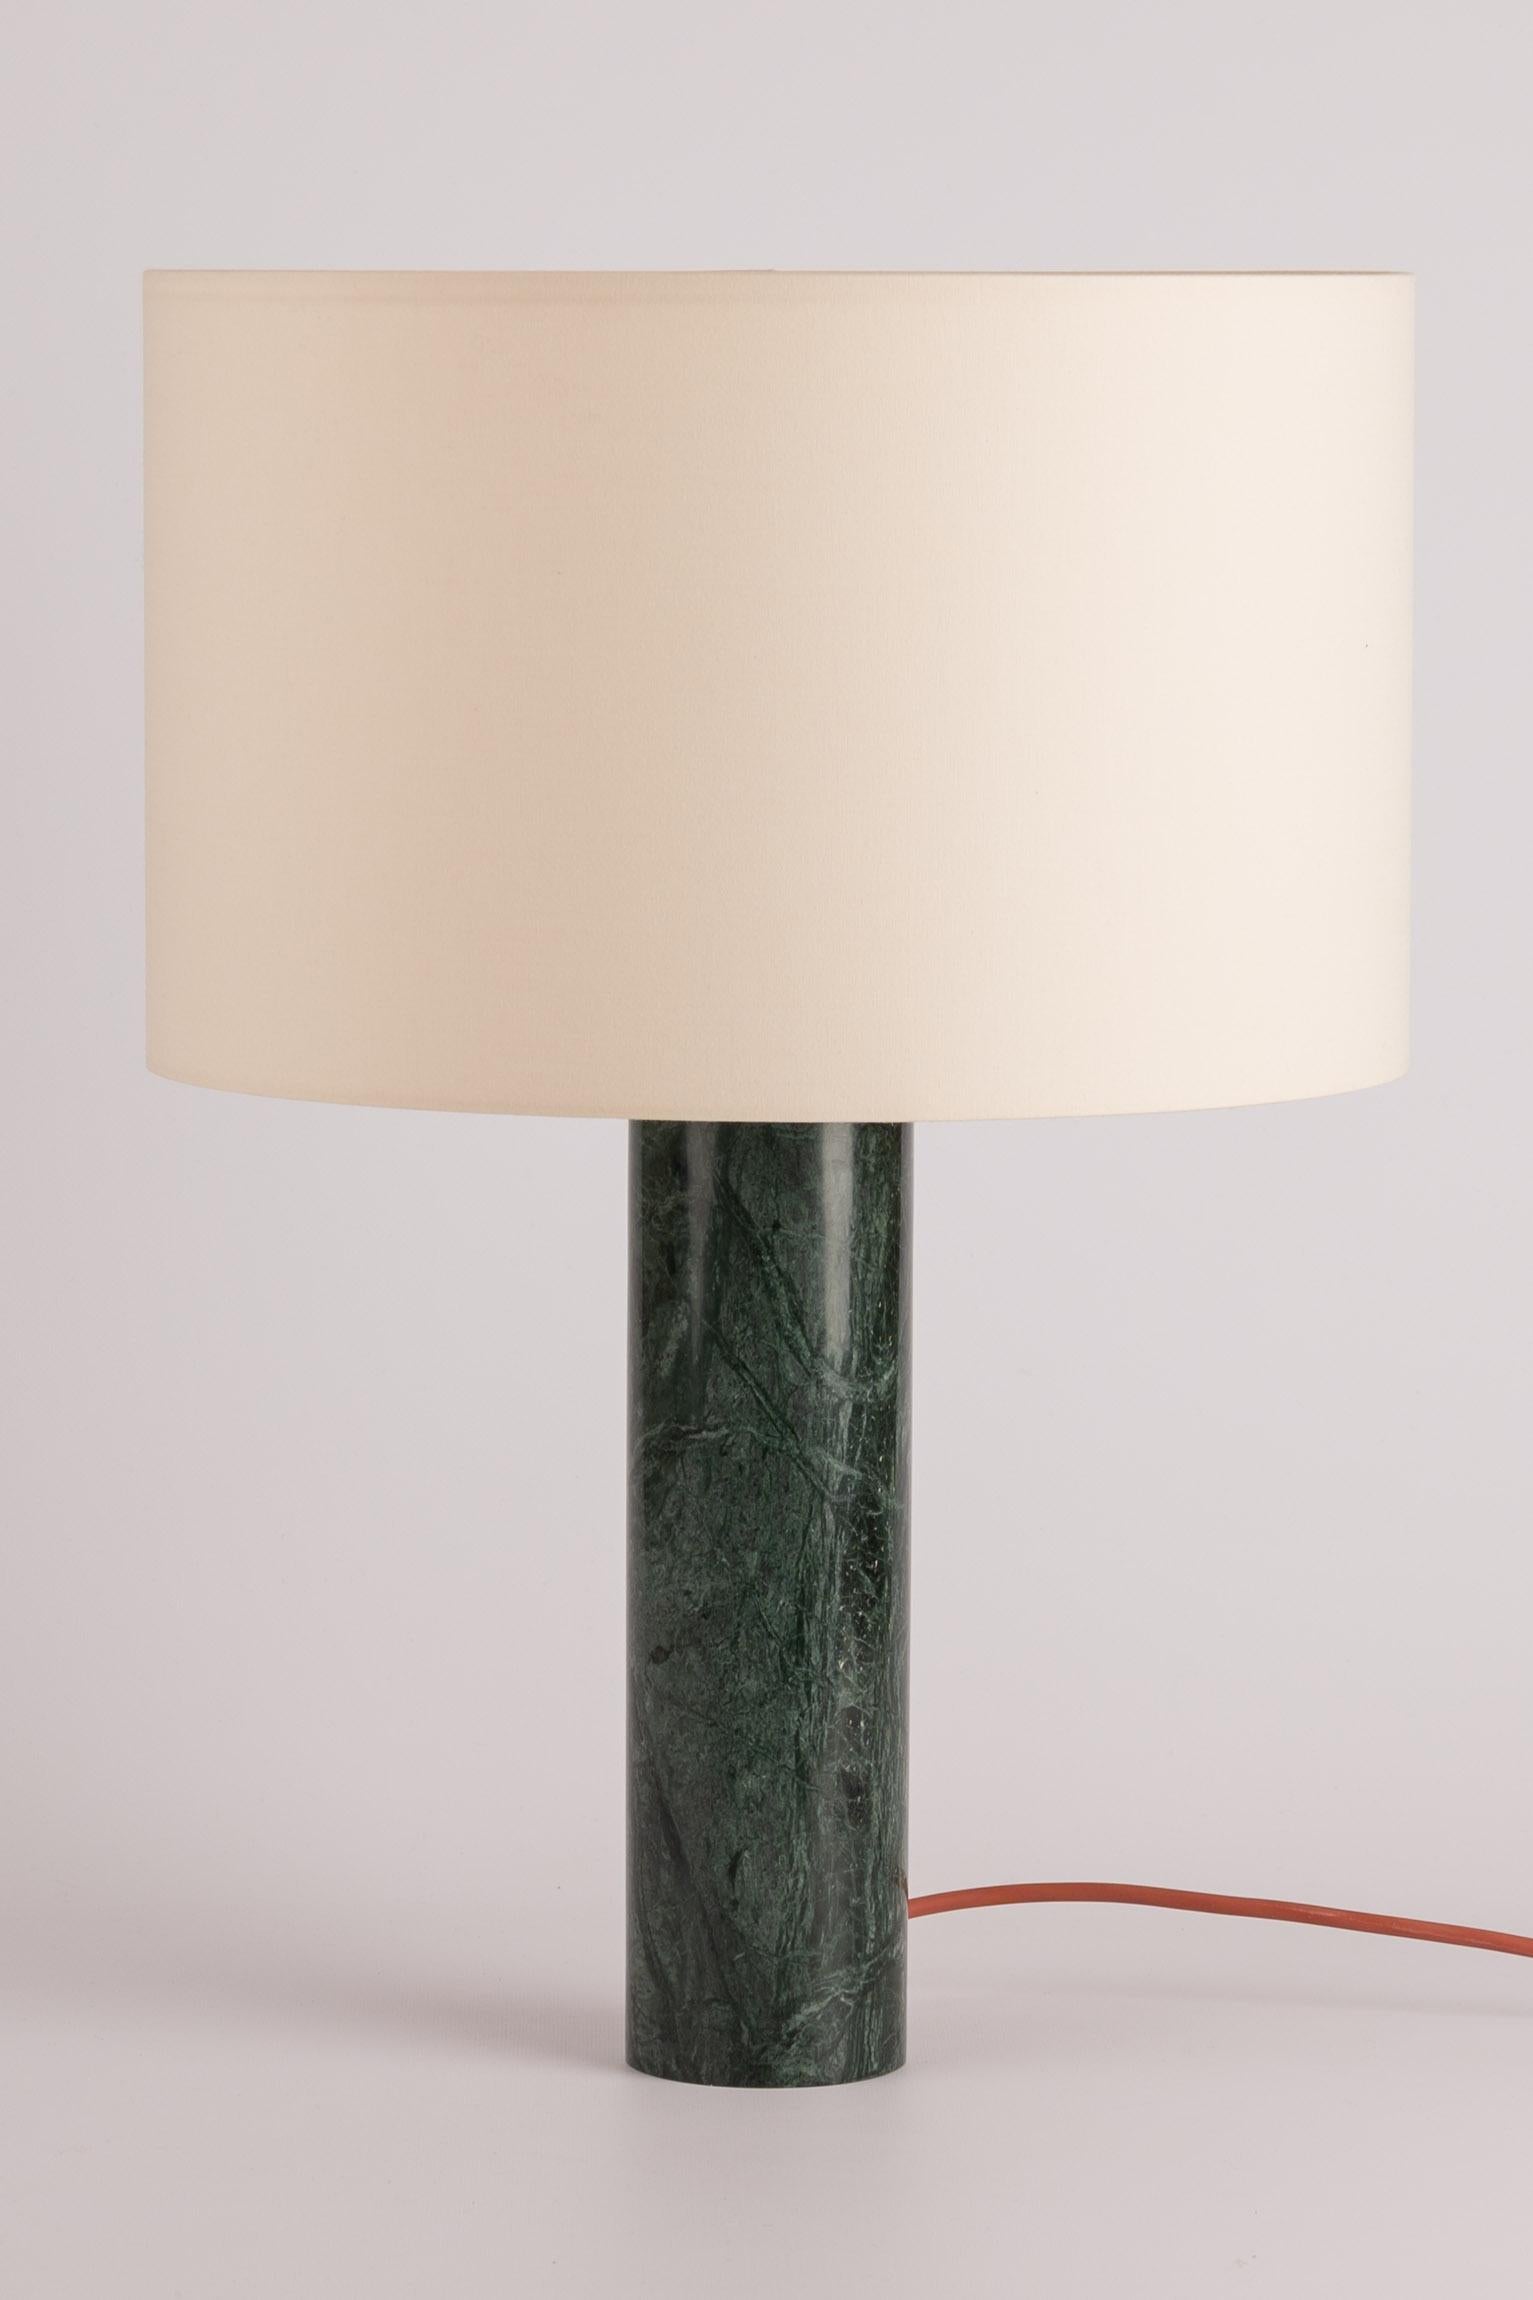 Green Marble Pipo Table Lamp by Simone & Marcel
Dimensions: Ø 40 x H 58 cm.
Materials: Cotton and green marble.

Also available in different marble and wood options and finishes. Custom options available on request. Please contact us. 

All our